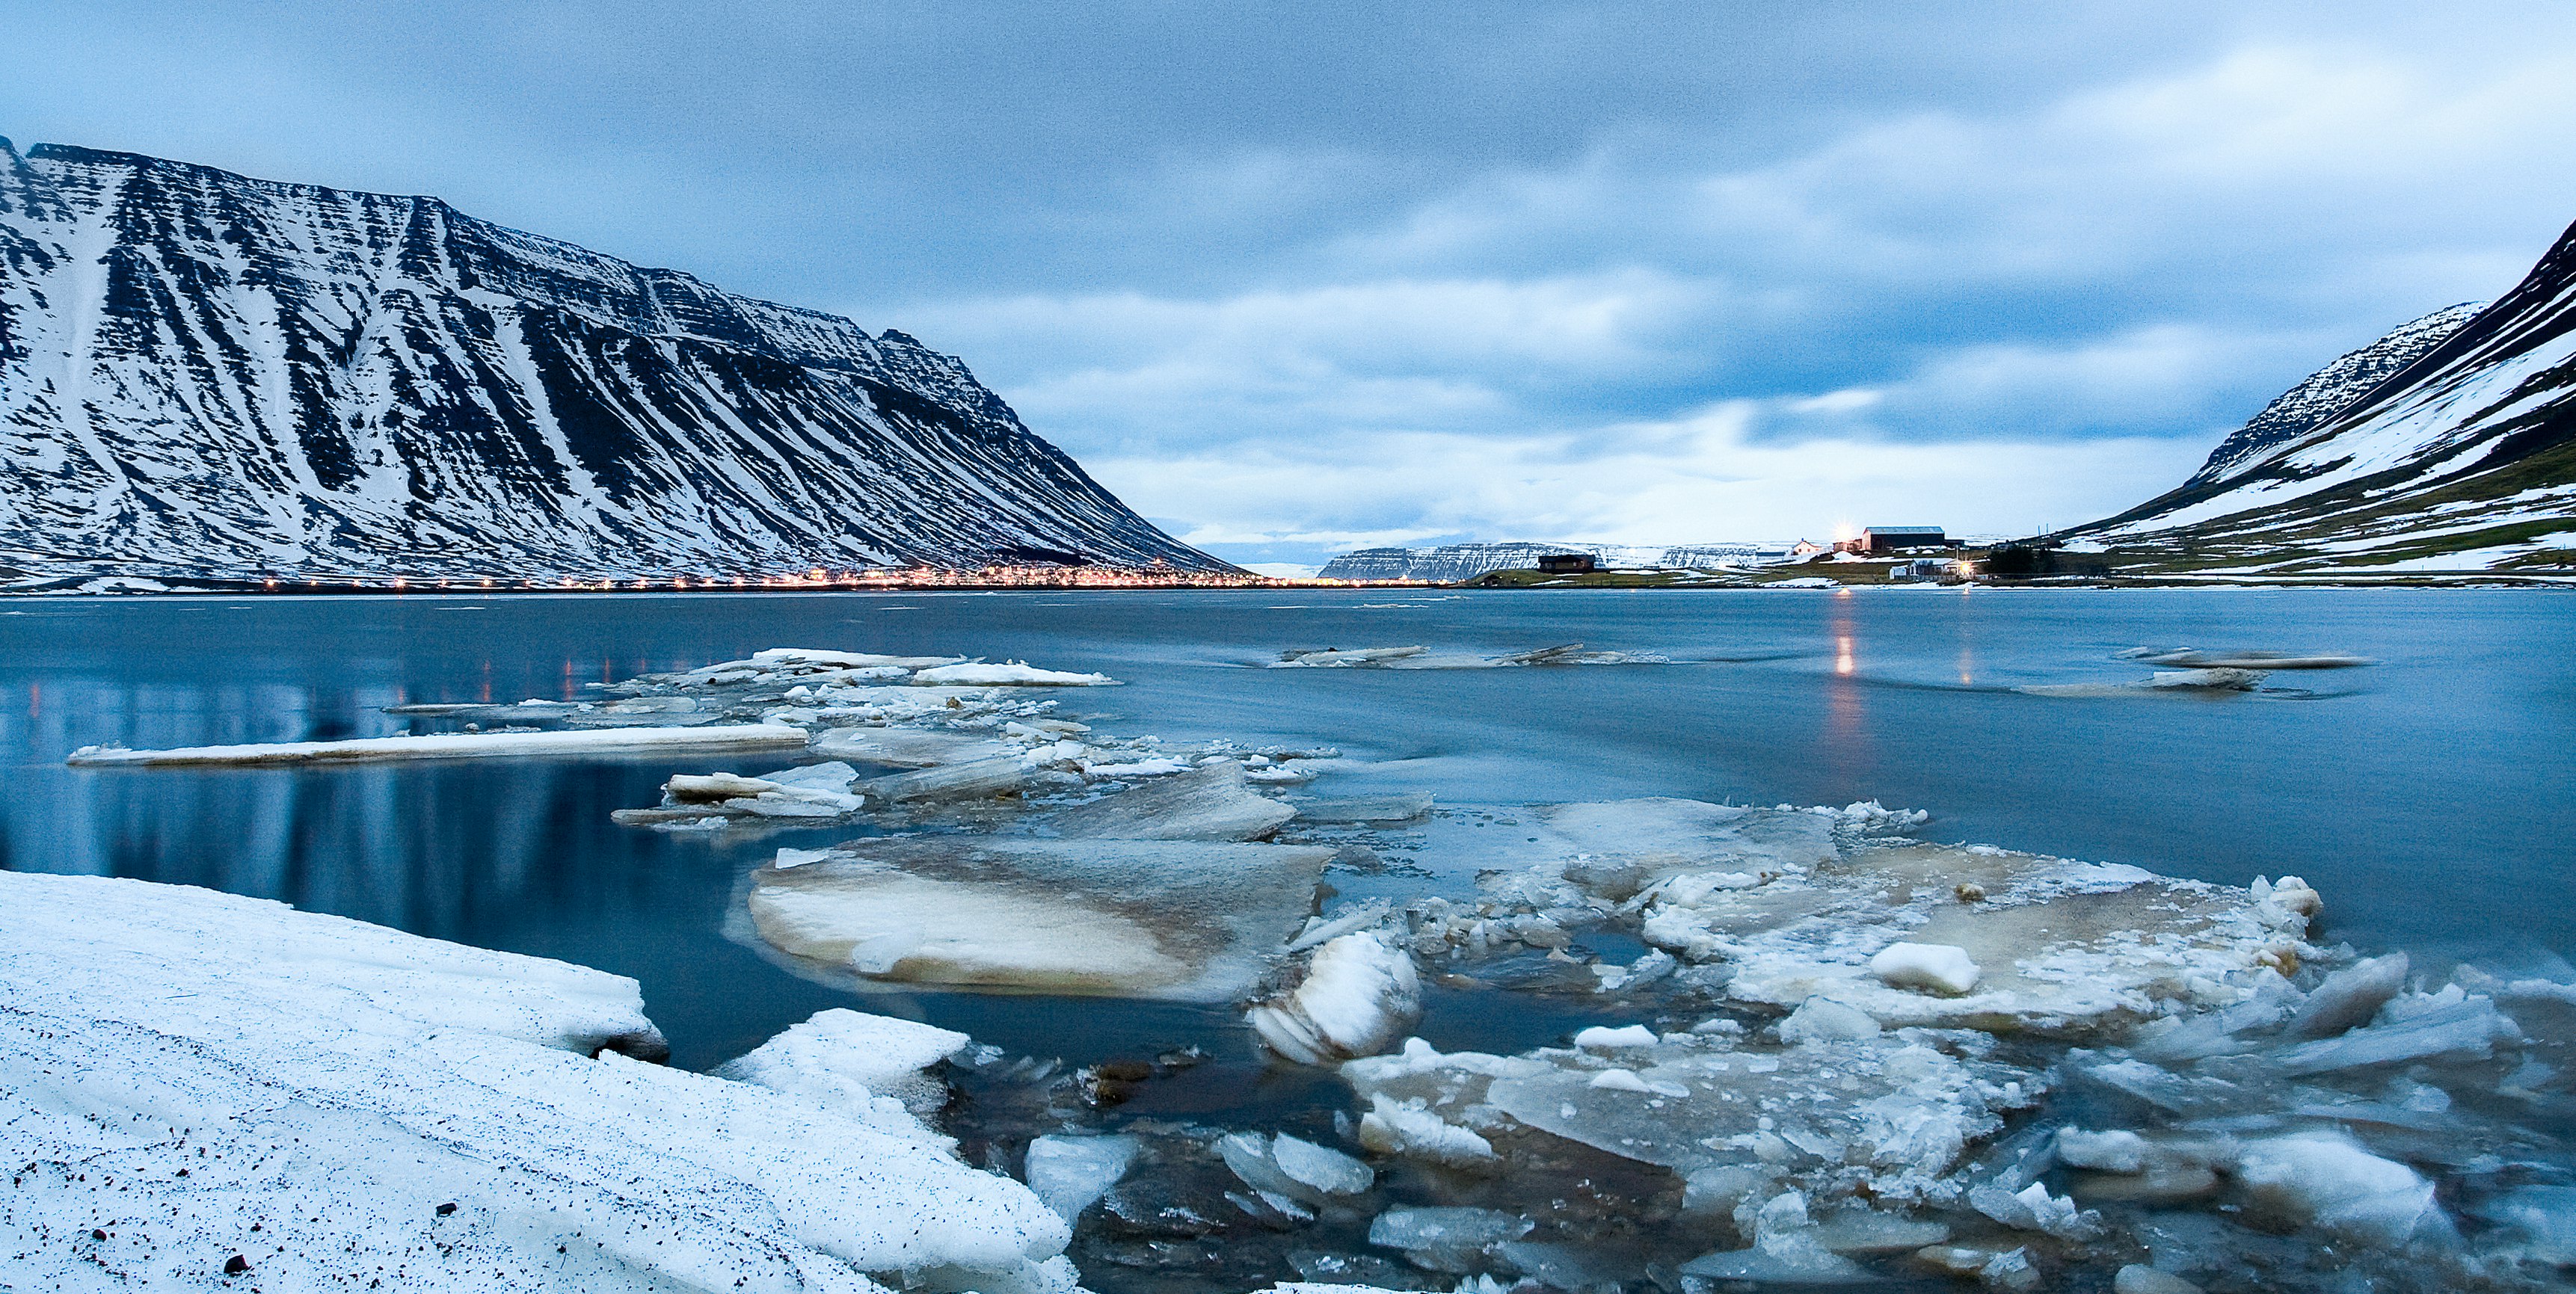 Winter afternoon in Ísafjörður, Westfjords; the fjord contains ice and the lights of the town are visible on the far side of the fjord.